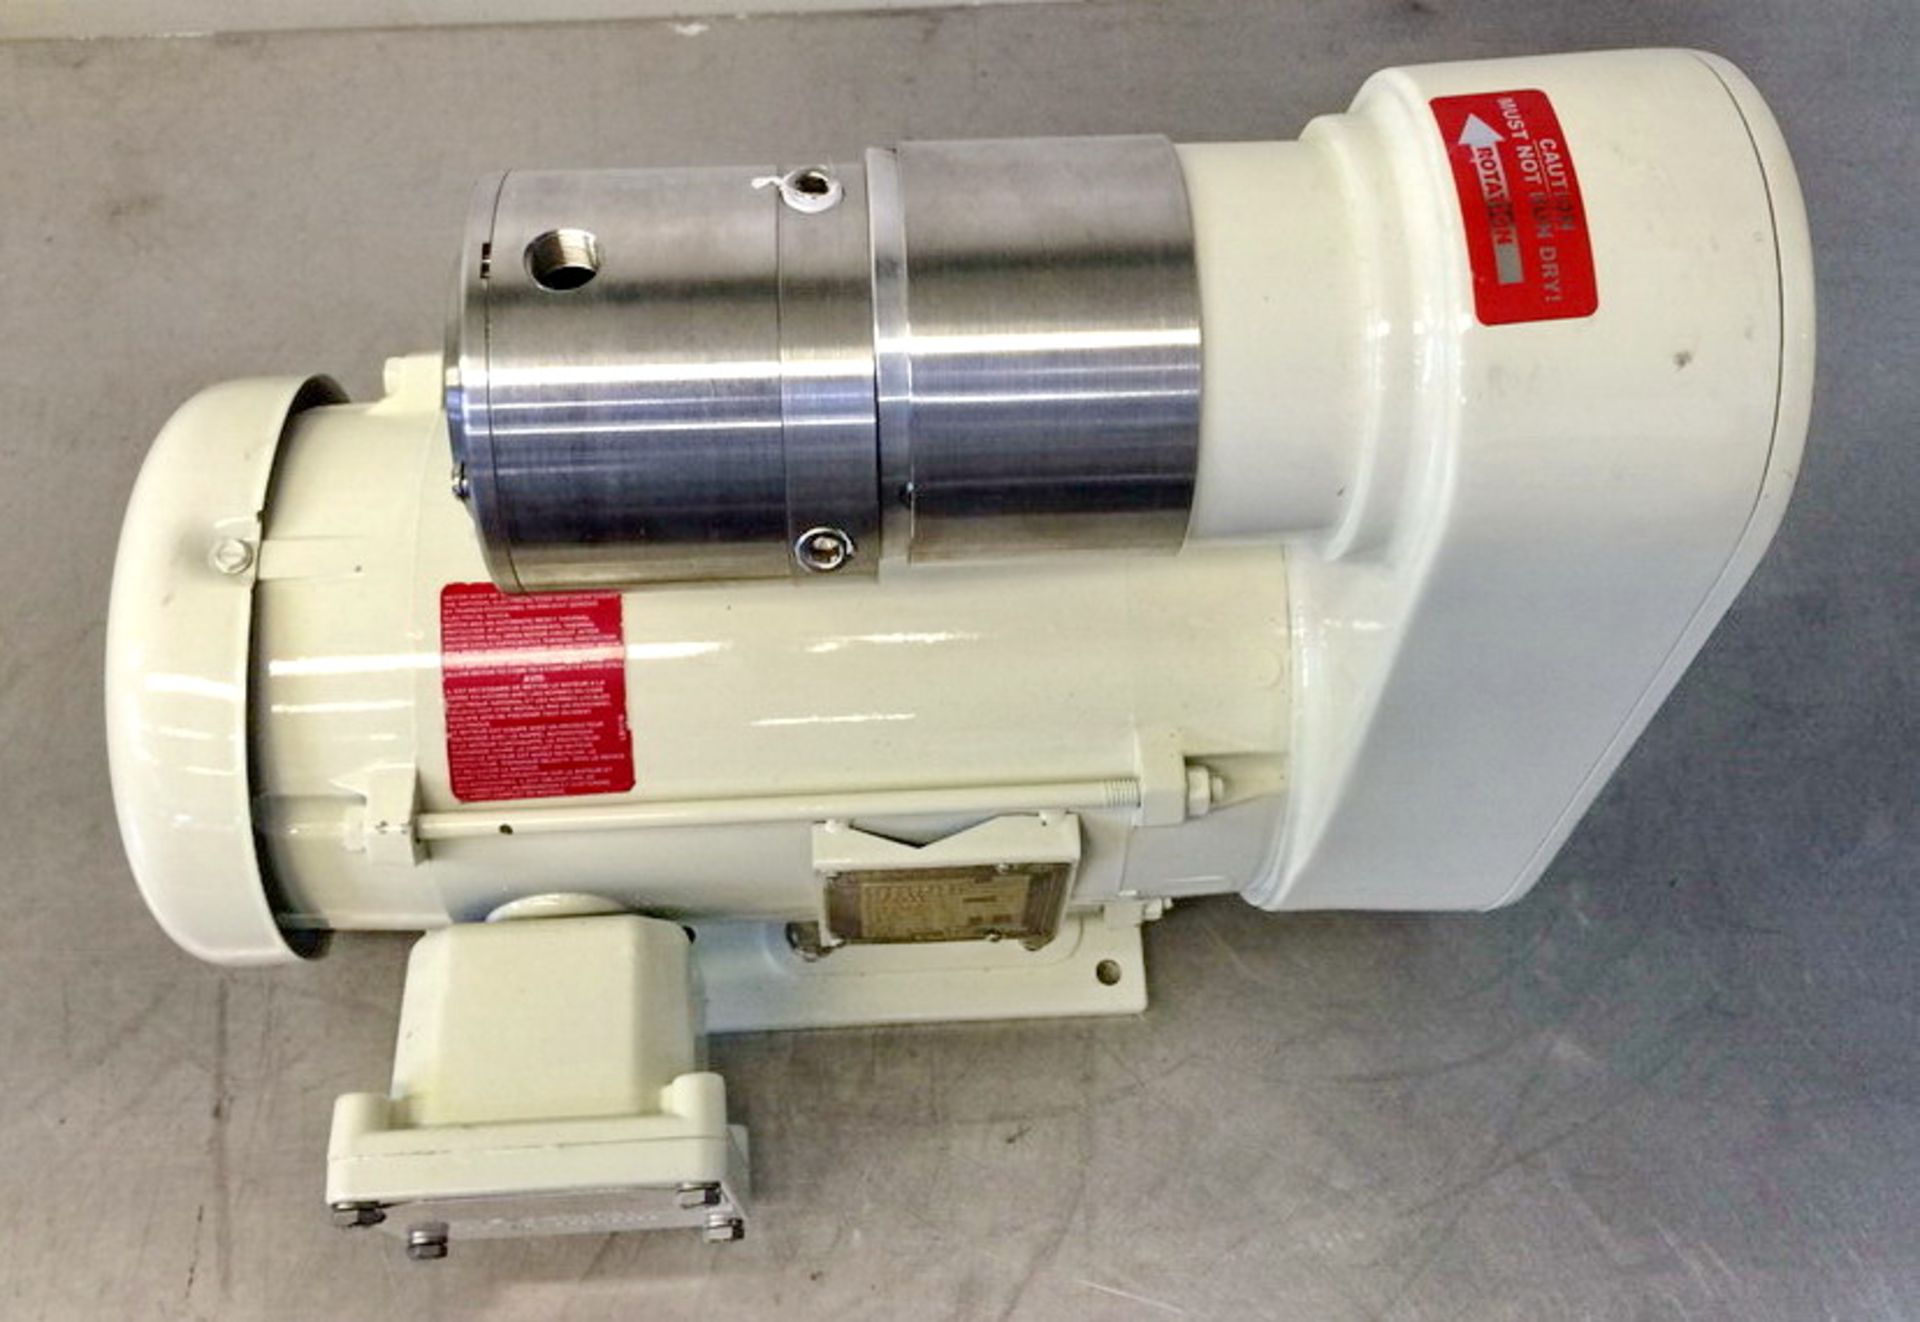 New/Unused Ross Lab Size Inline Rotor/Stator High Shear Mixer, Model HSM-400DL S/N 105004 - Image 3 of 6